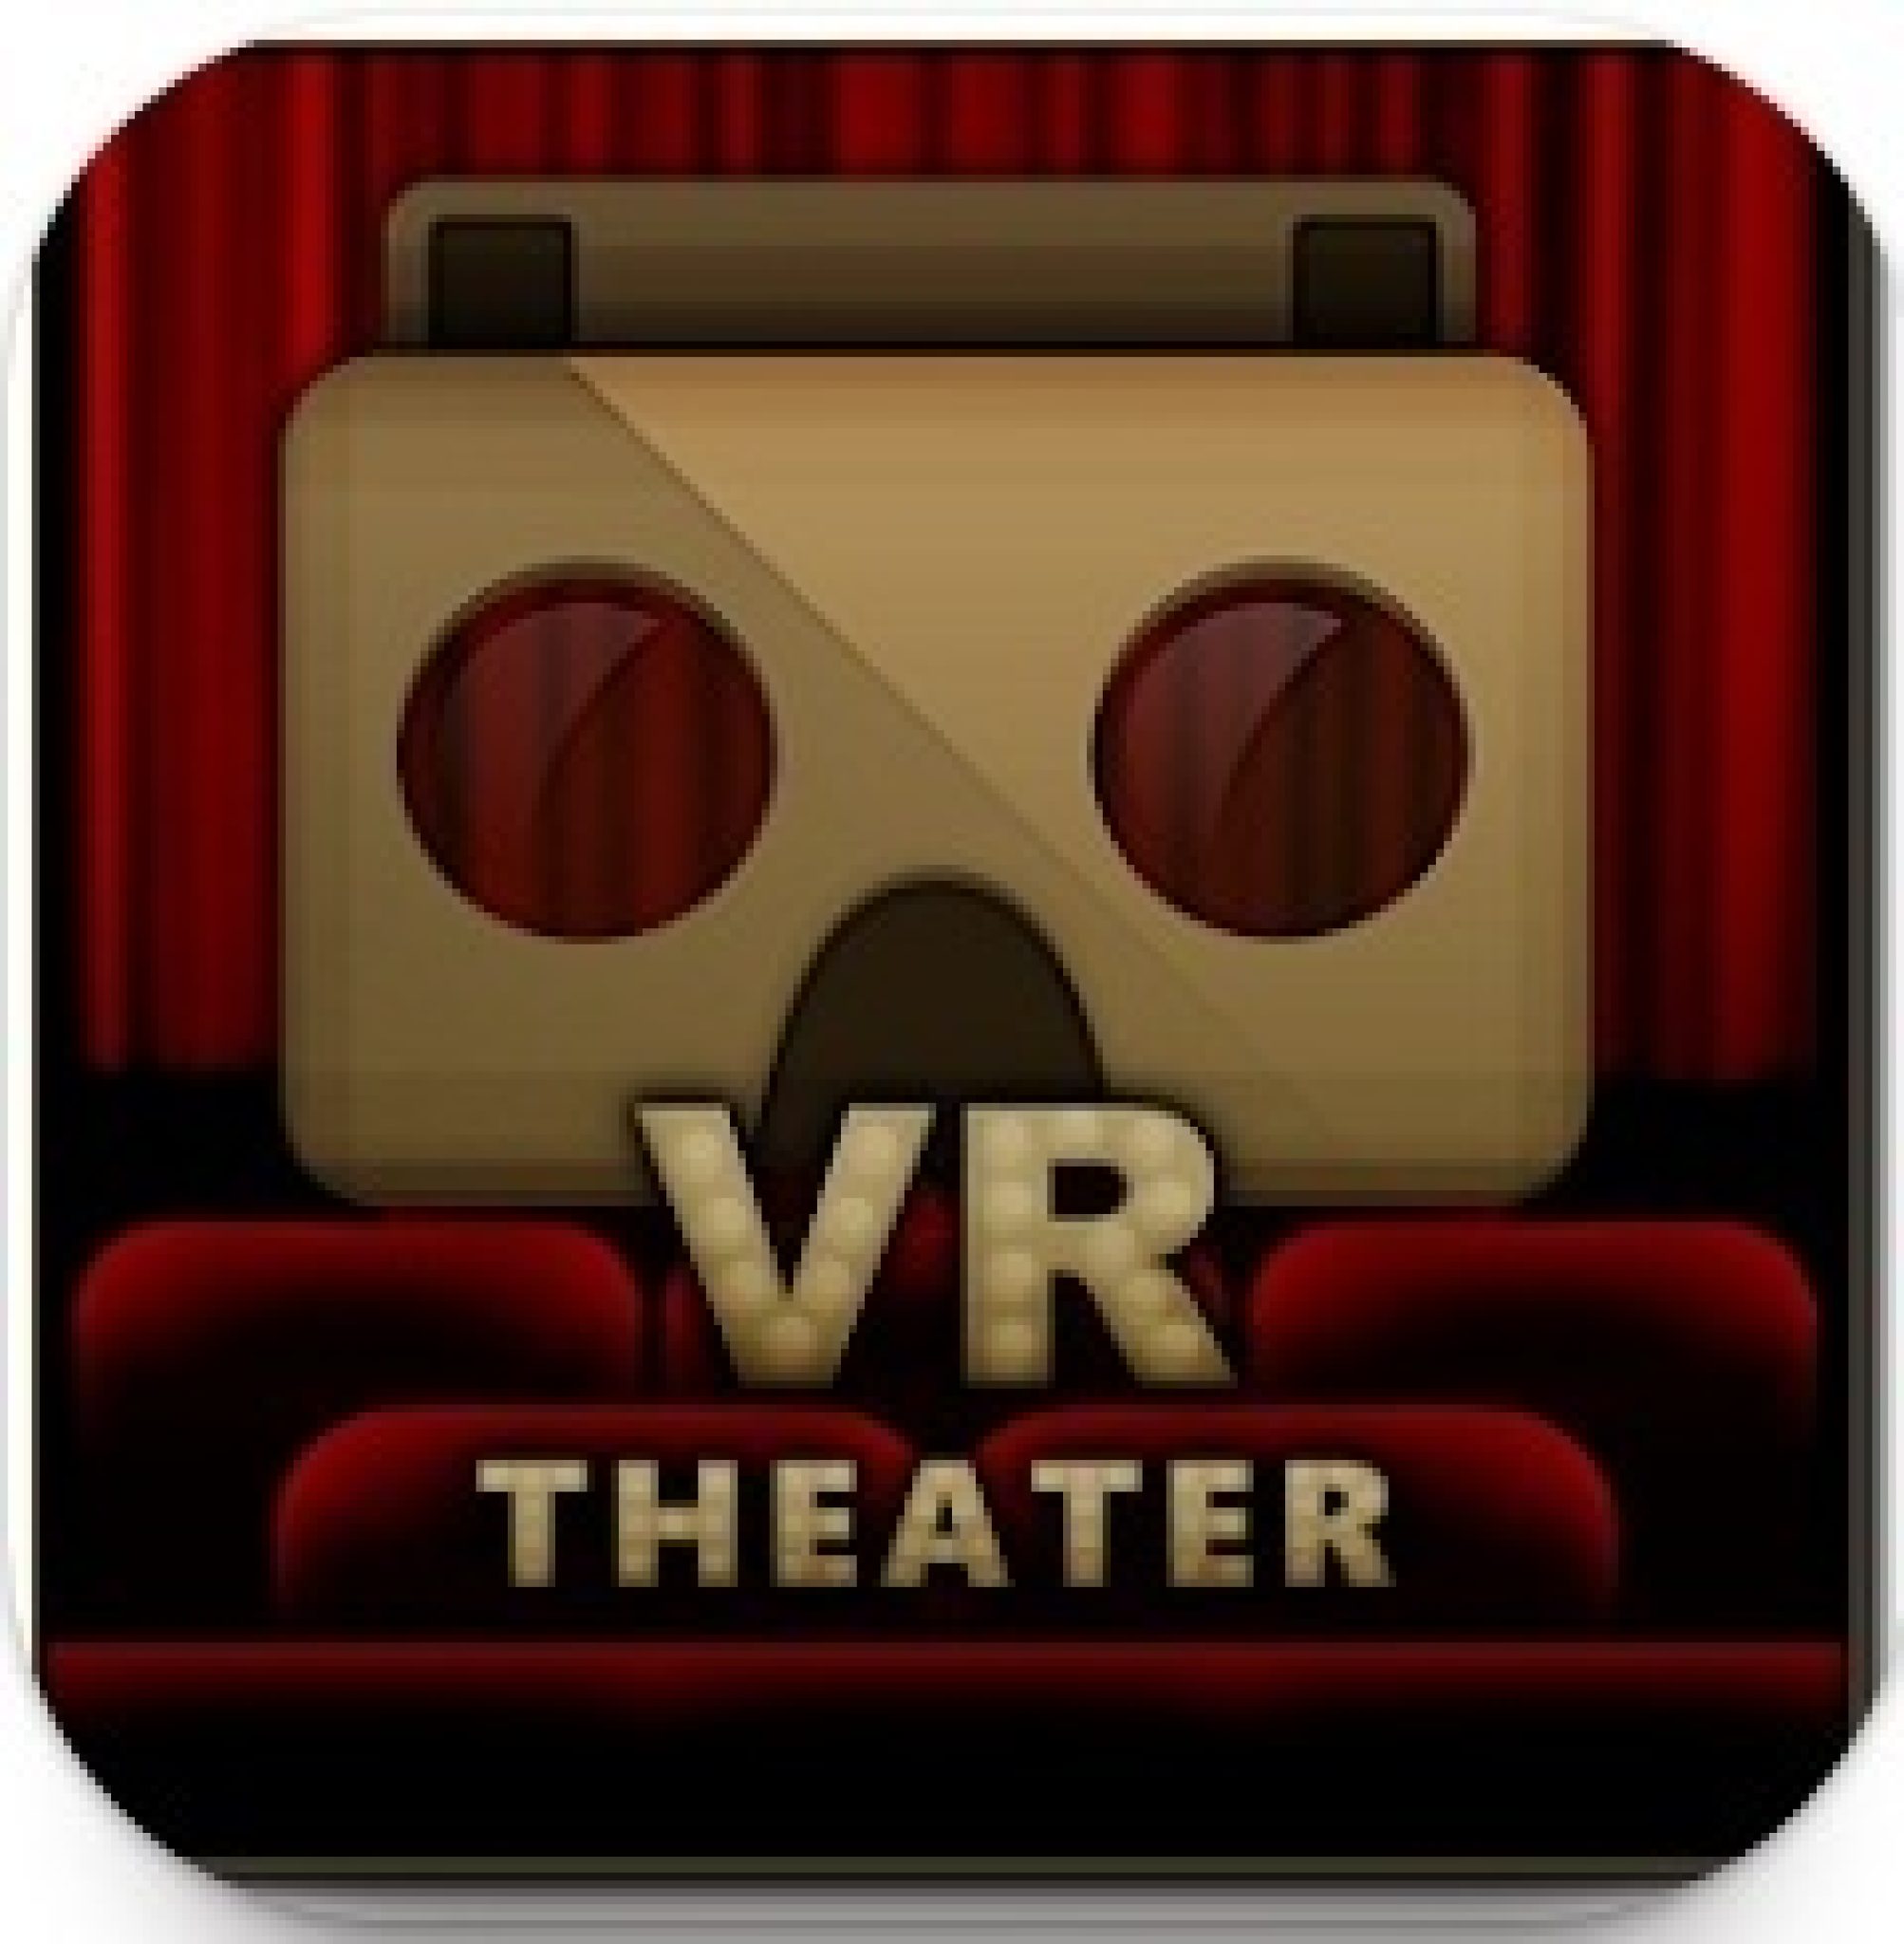 Home theater vr. VR Theater. Cardboard Theater. Cardboard приложение. Home Theater VR Pro APK.